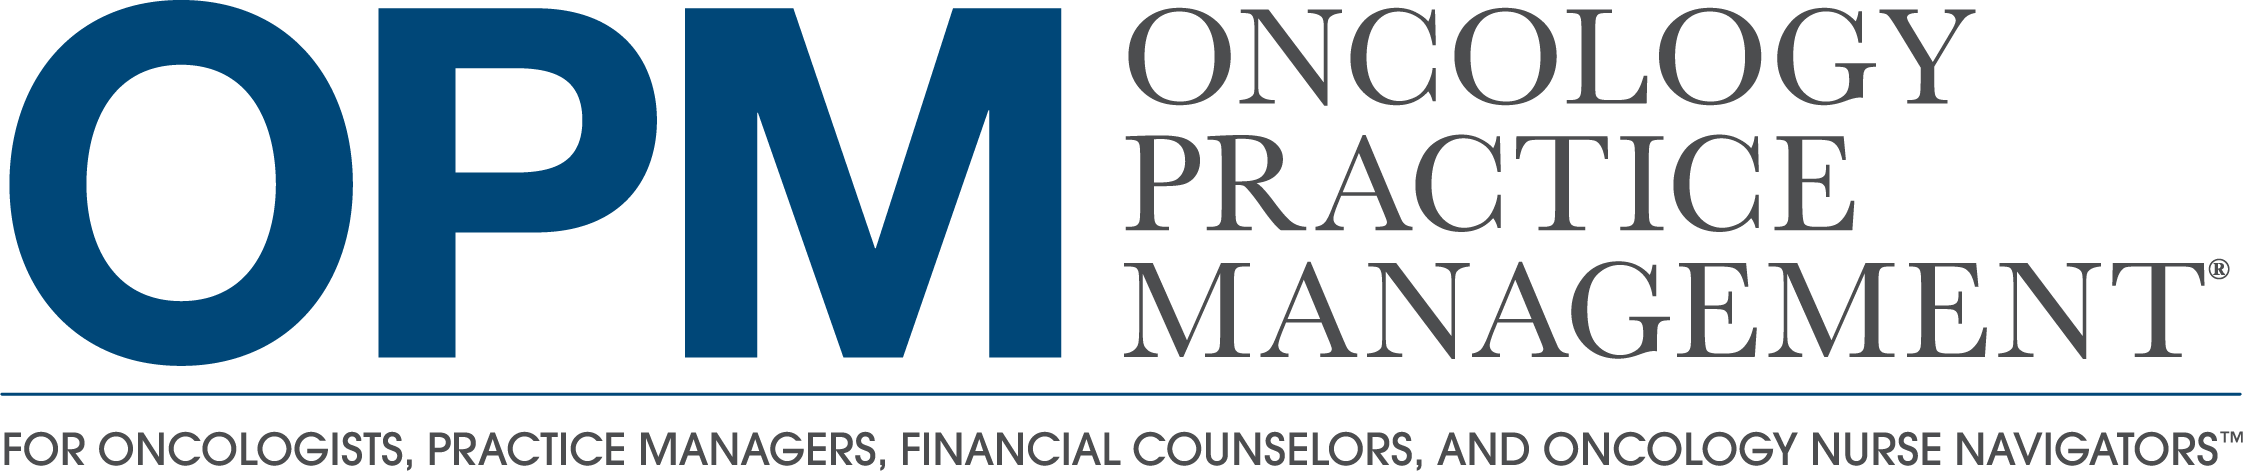 OPM oncology practice management